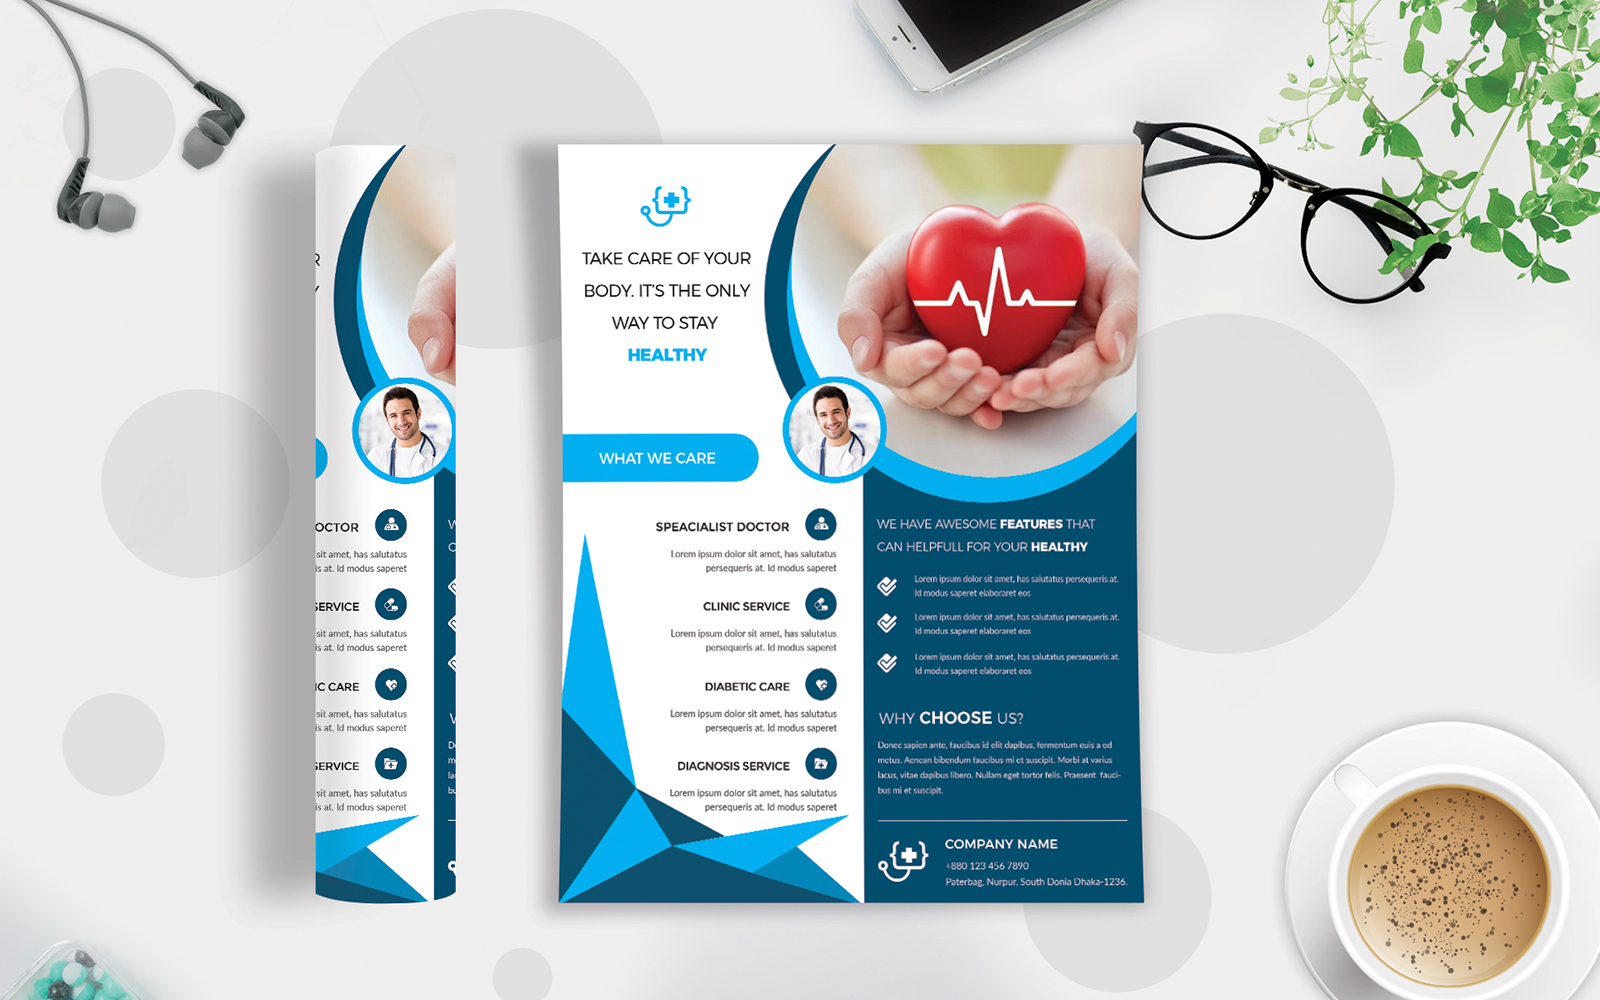 Doctor & Medical Flyer - Corporate Identity Template